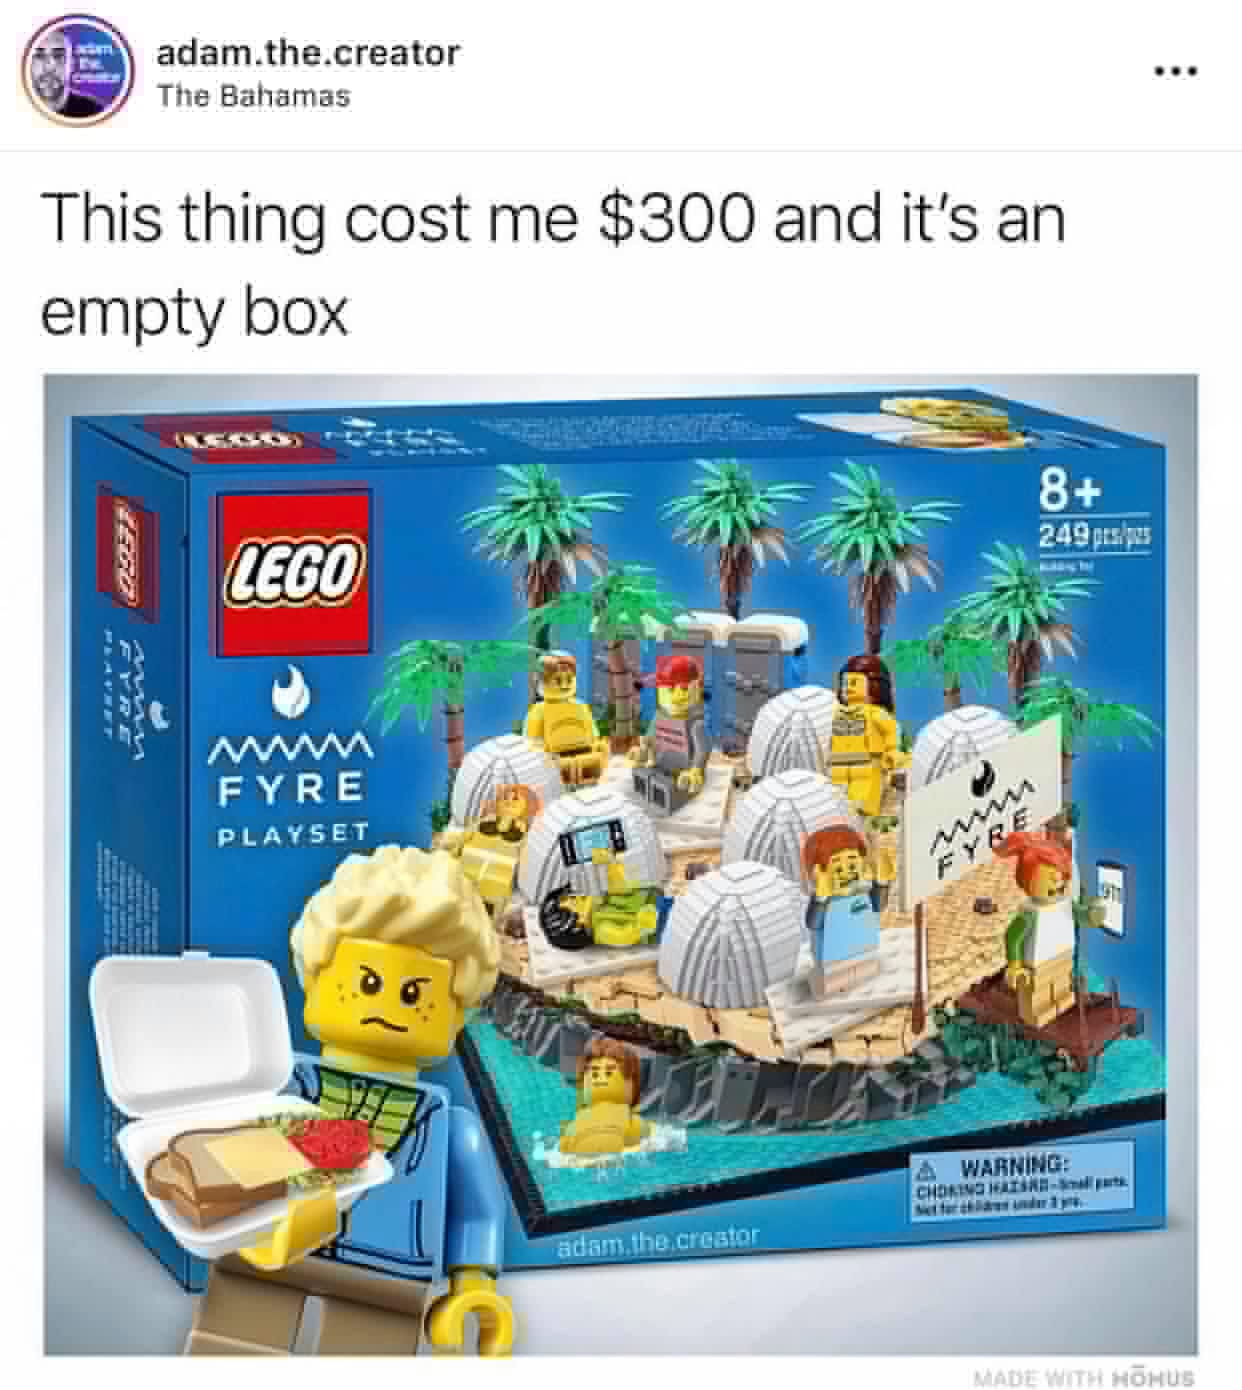 fyre festival lego meme - adam.the.creator The Bahamas This thing cost me $300 and it's an empty box 8 249pts Lego Mw Fyre Playset Warning Choringhetsna adam.the creator Made With Hhus